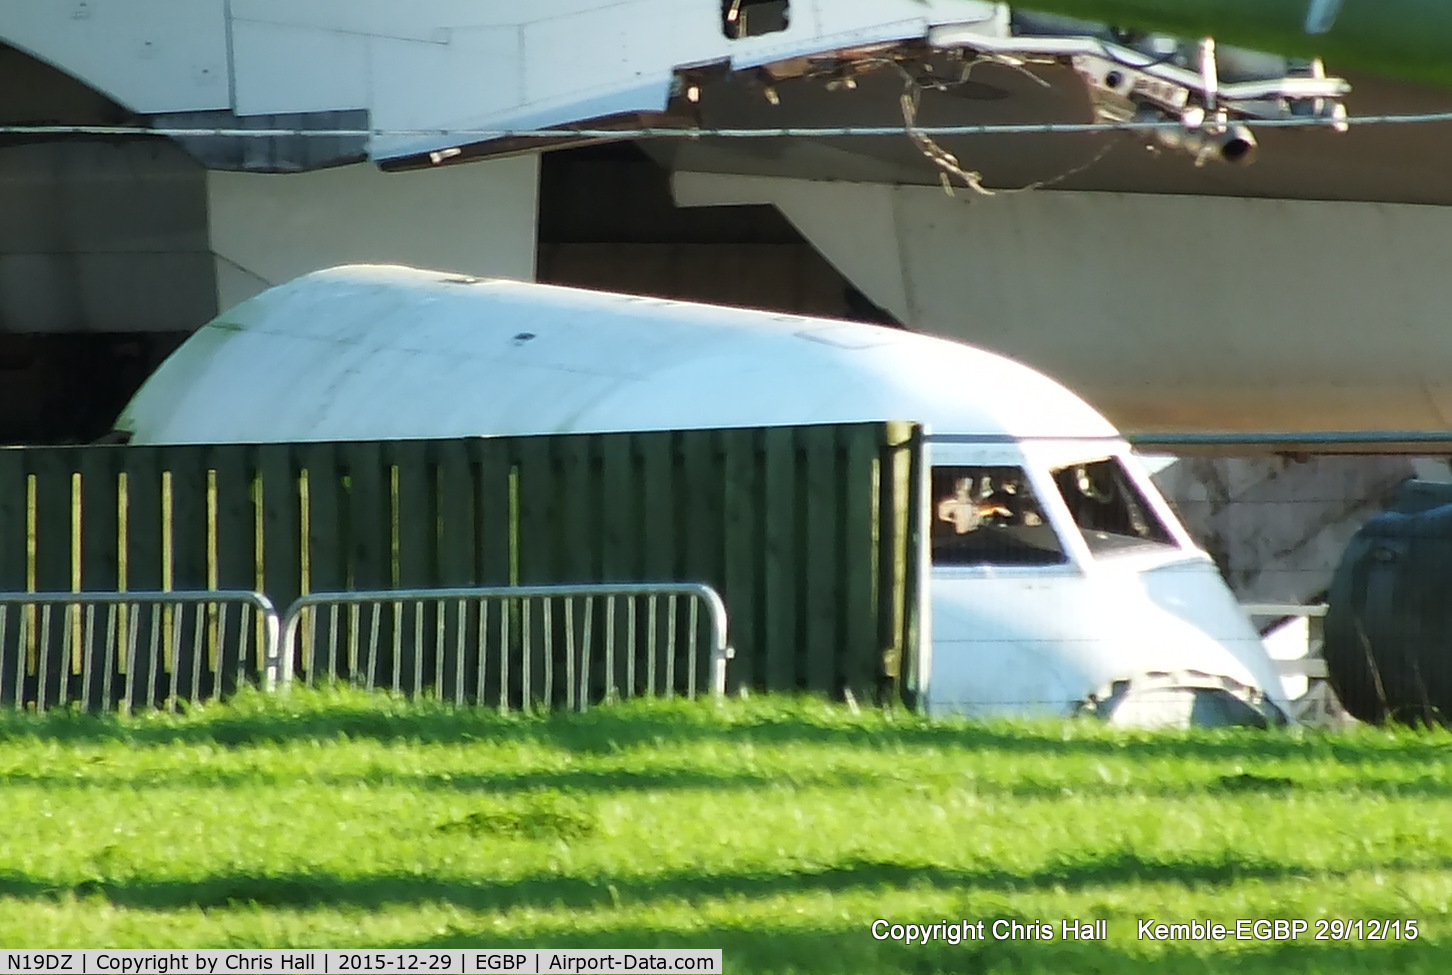 N19DZ, 1992 ATR 72-202 C/N 297, in the scrapping area at Kemble